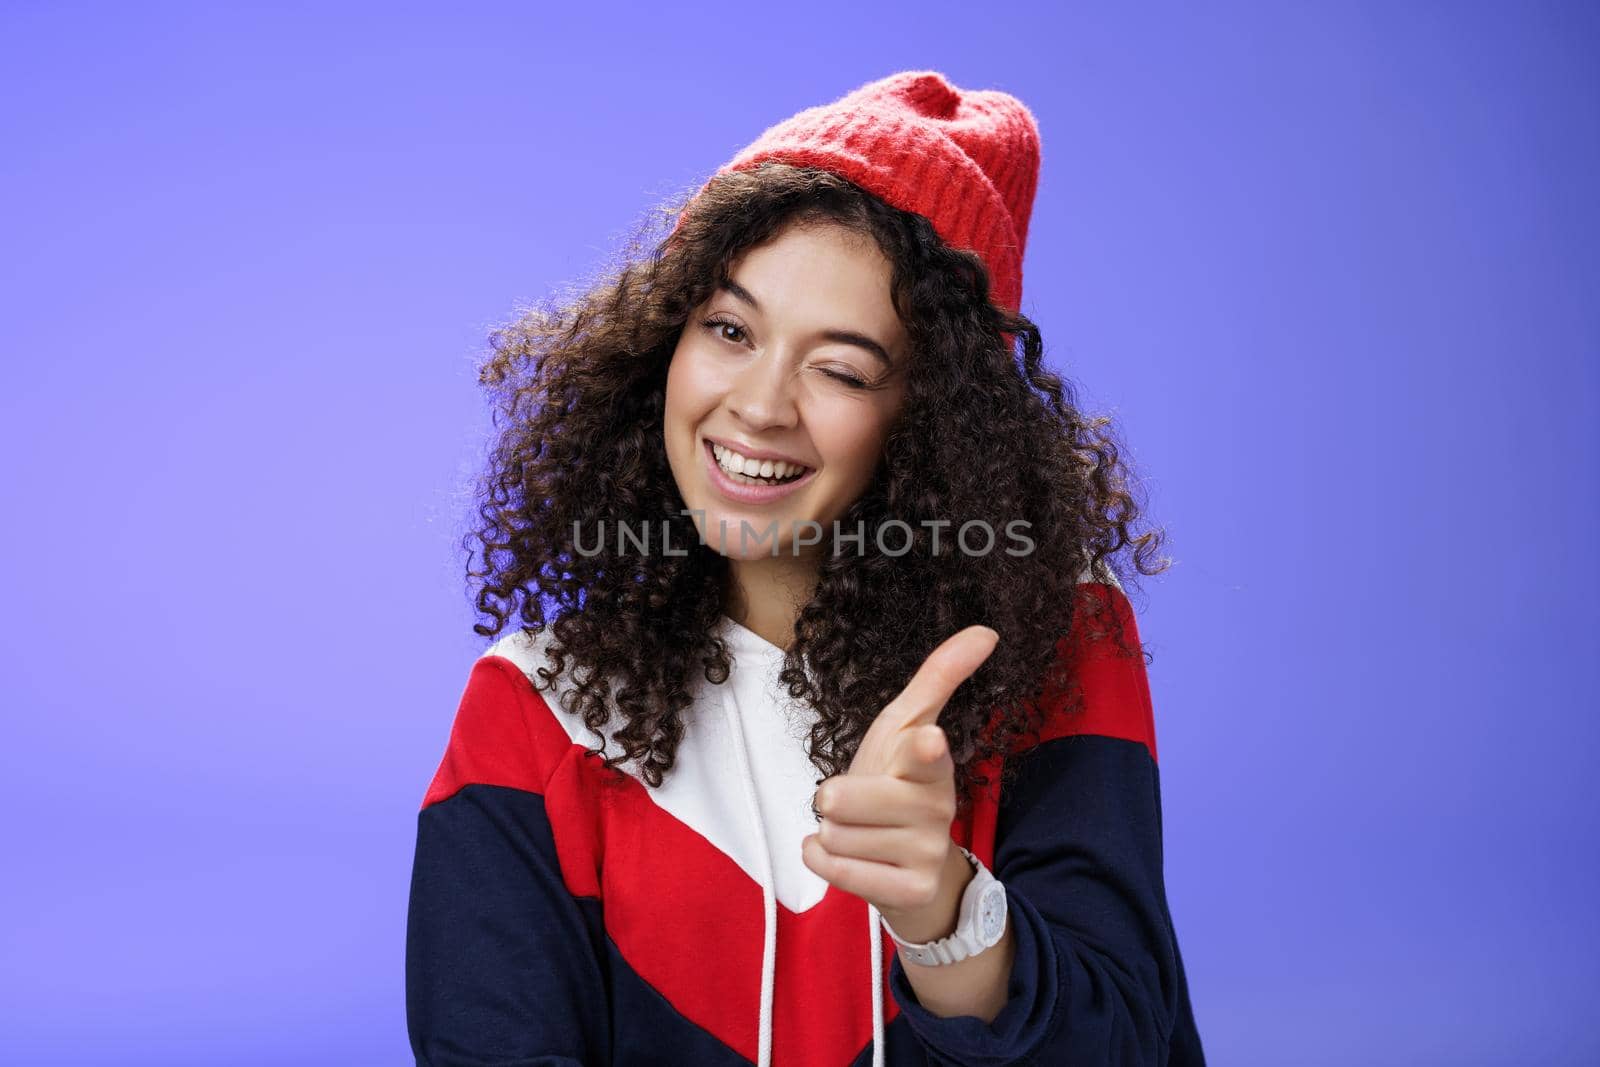 Friendly-looking sociable and stylish woman with curly hair in red beanie winking joyfully and pointing with finger pistol at camera as greeting mate being cool and confident over blue wall.